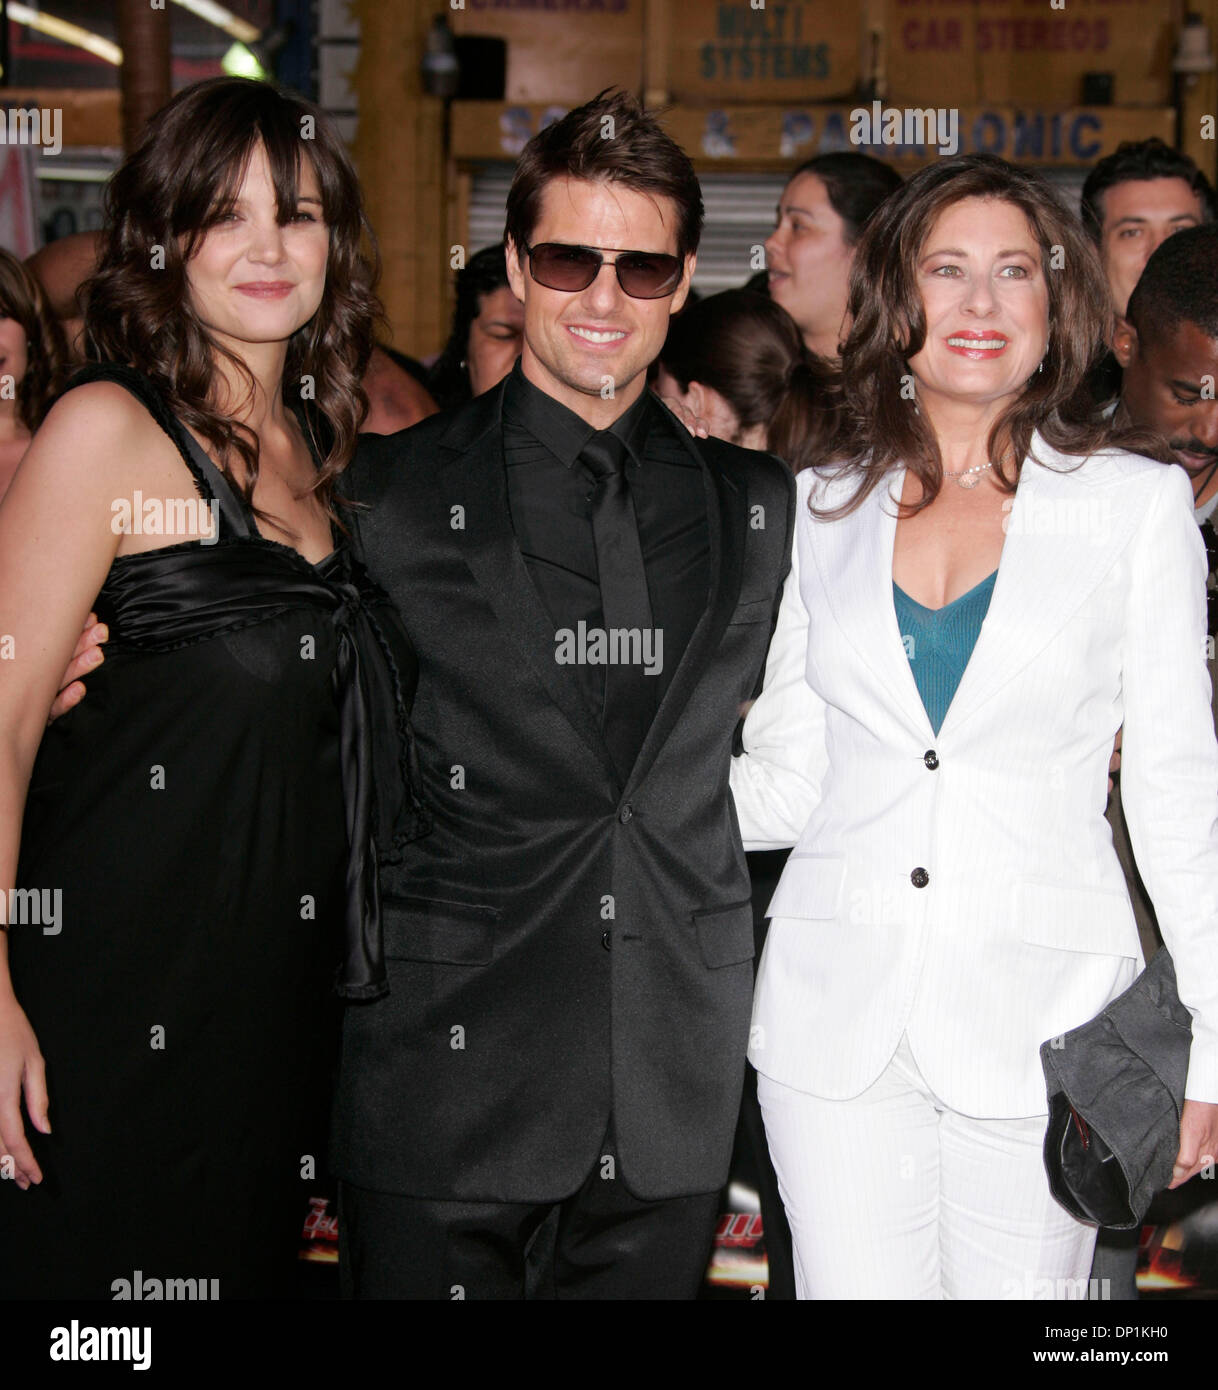 May 4, 2006; Hollywood, California, USA; Actress KATIE HOLMES, Producing  Partners TOM CRUISE & PAULA WAGNER at the Los Angeles Fan Screening of  'Mission Impossible 3' held at the Chinese Theatre. Mandatory